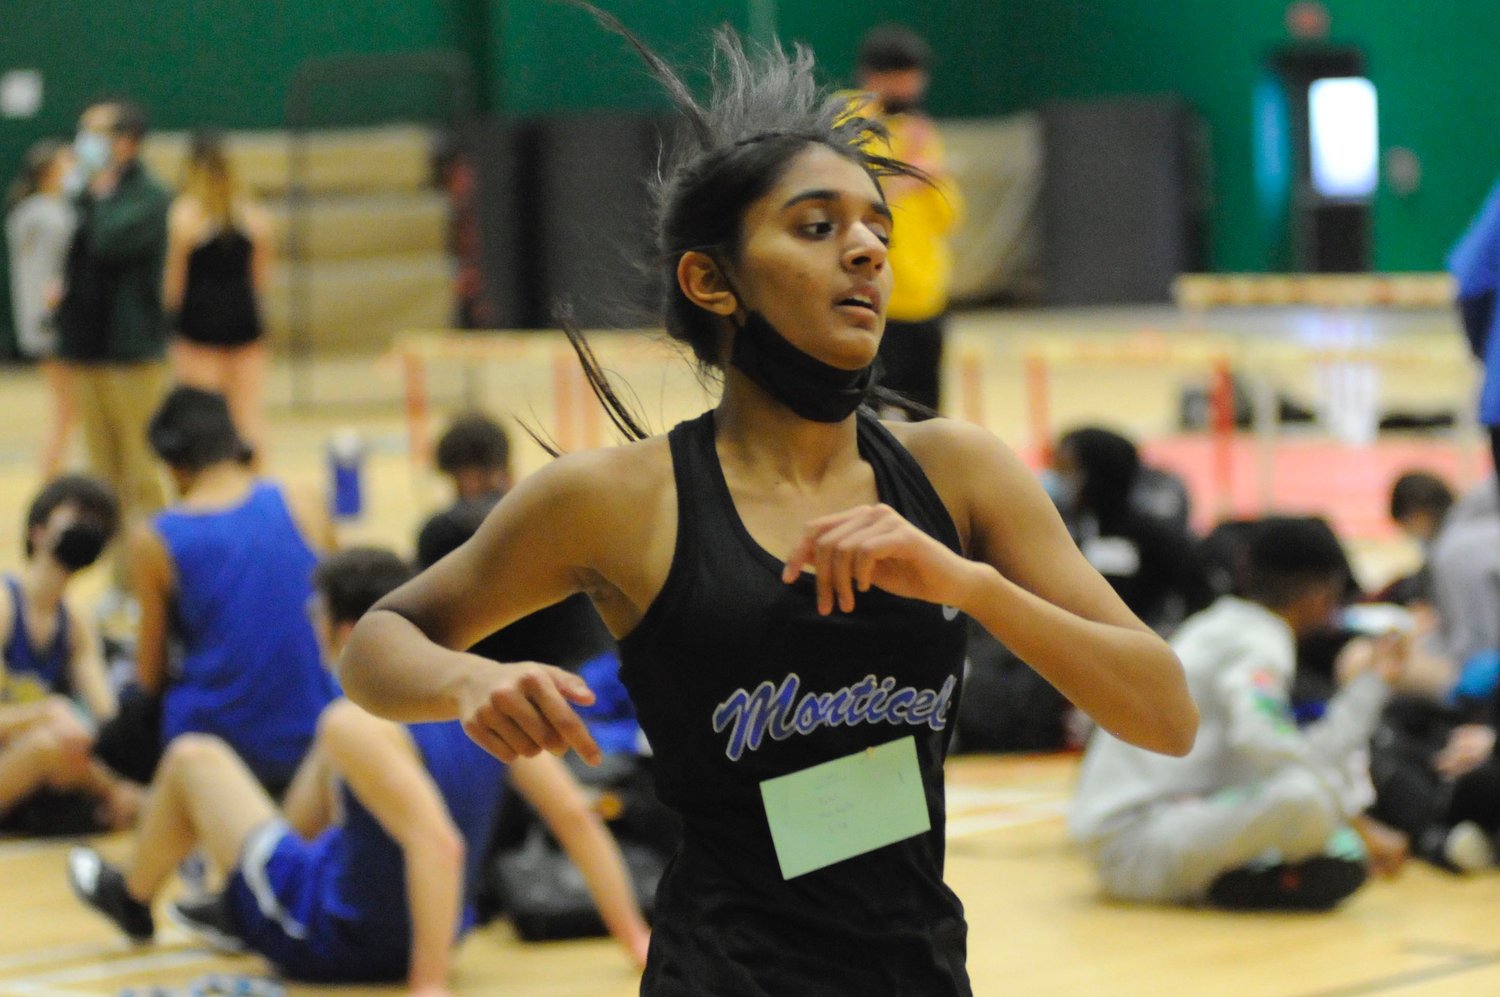 Monticello’s Diya Patel placed second in the 1,000 meter run, and was a member of the Panthers’ winning 4x100-lap and 4x200-lap relay teams.